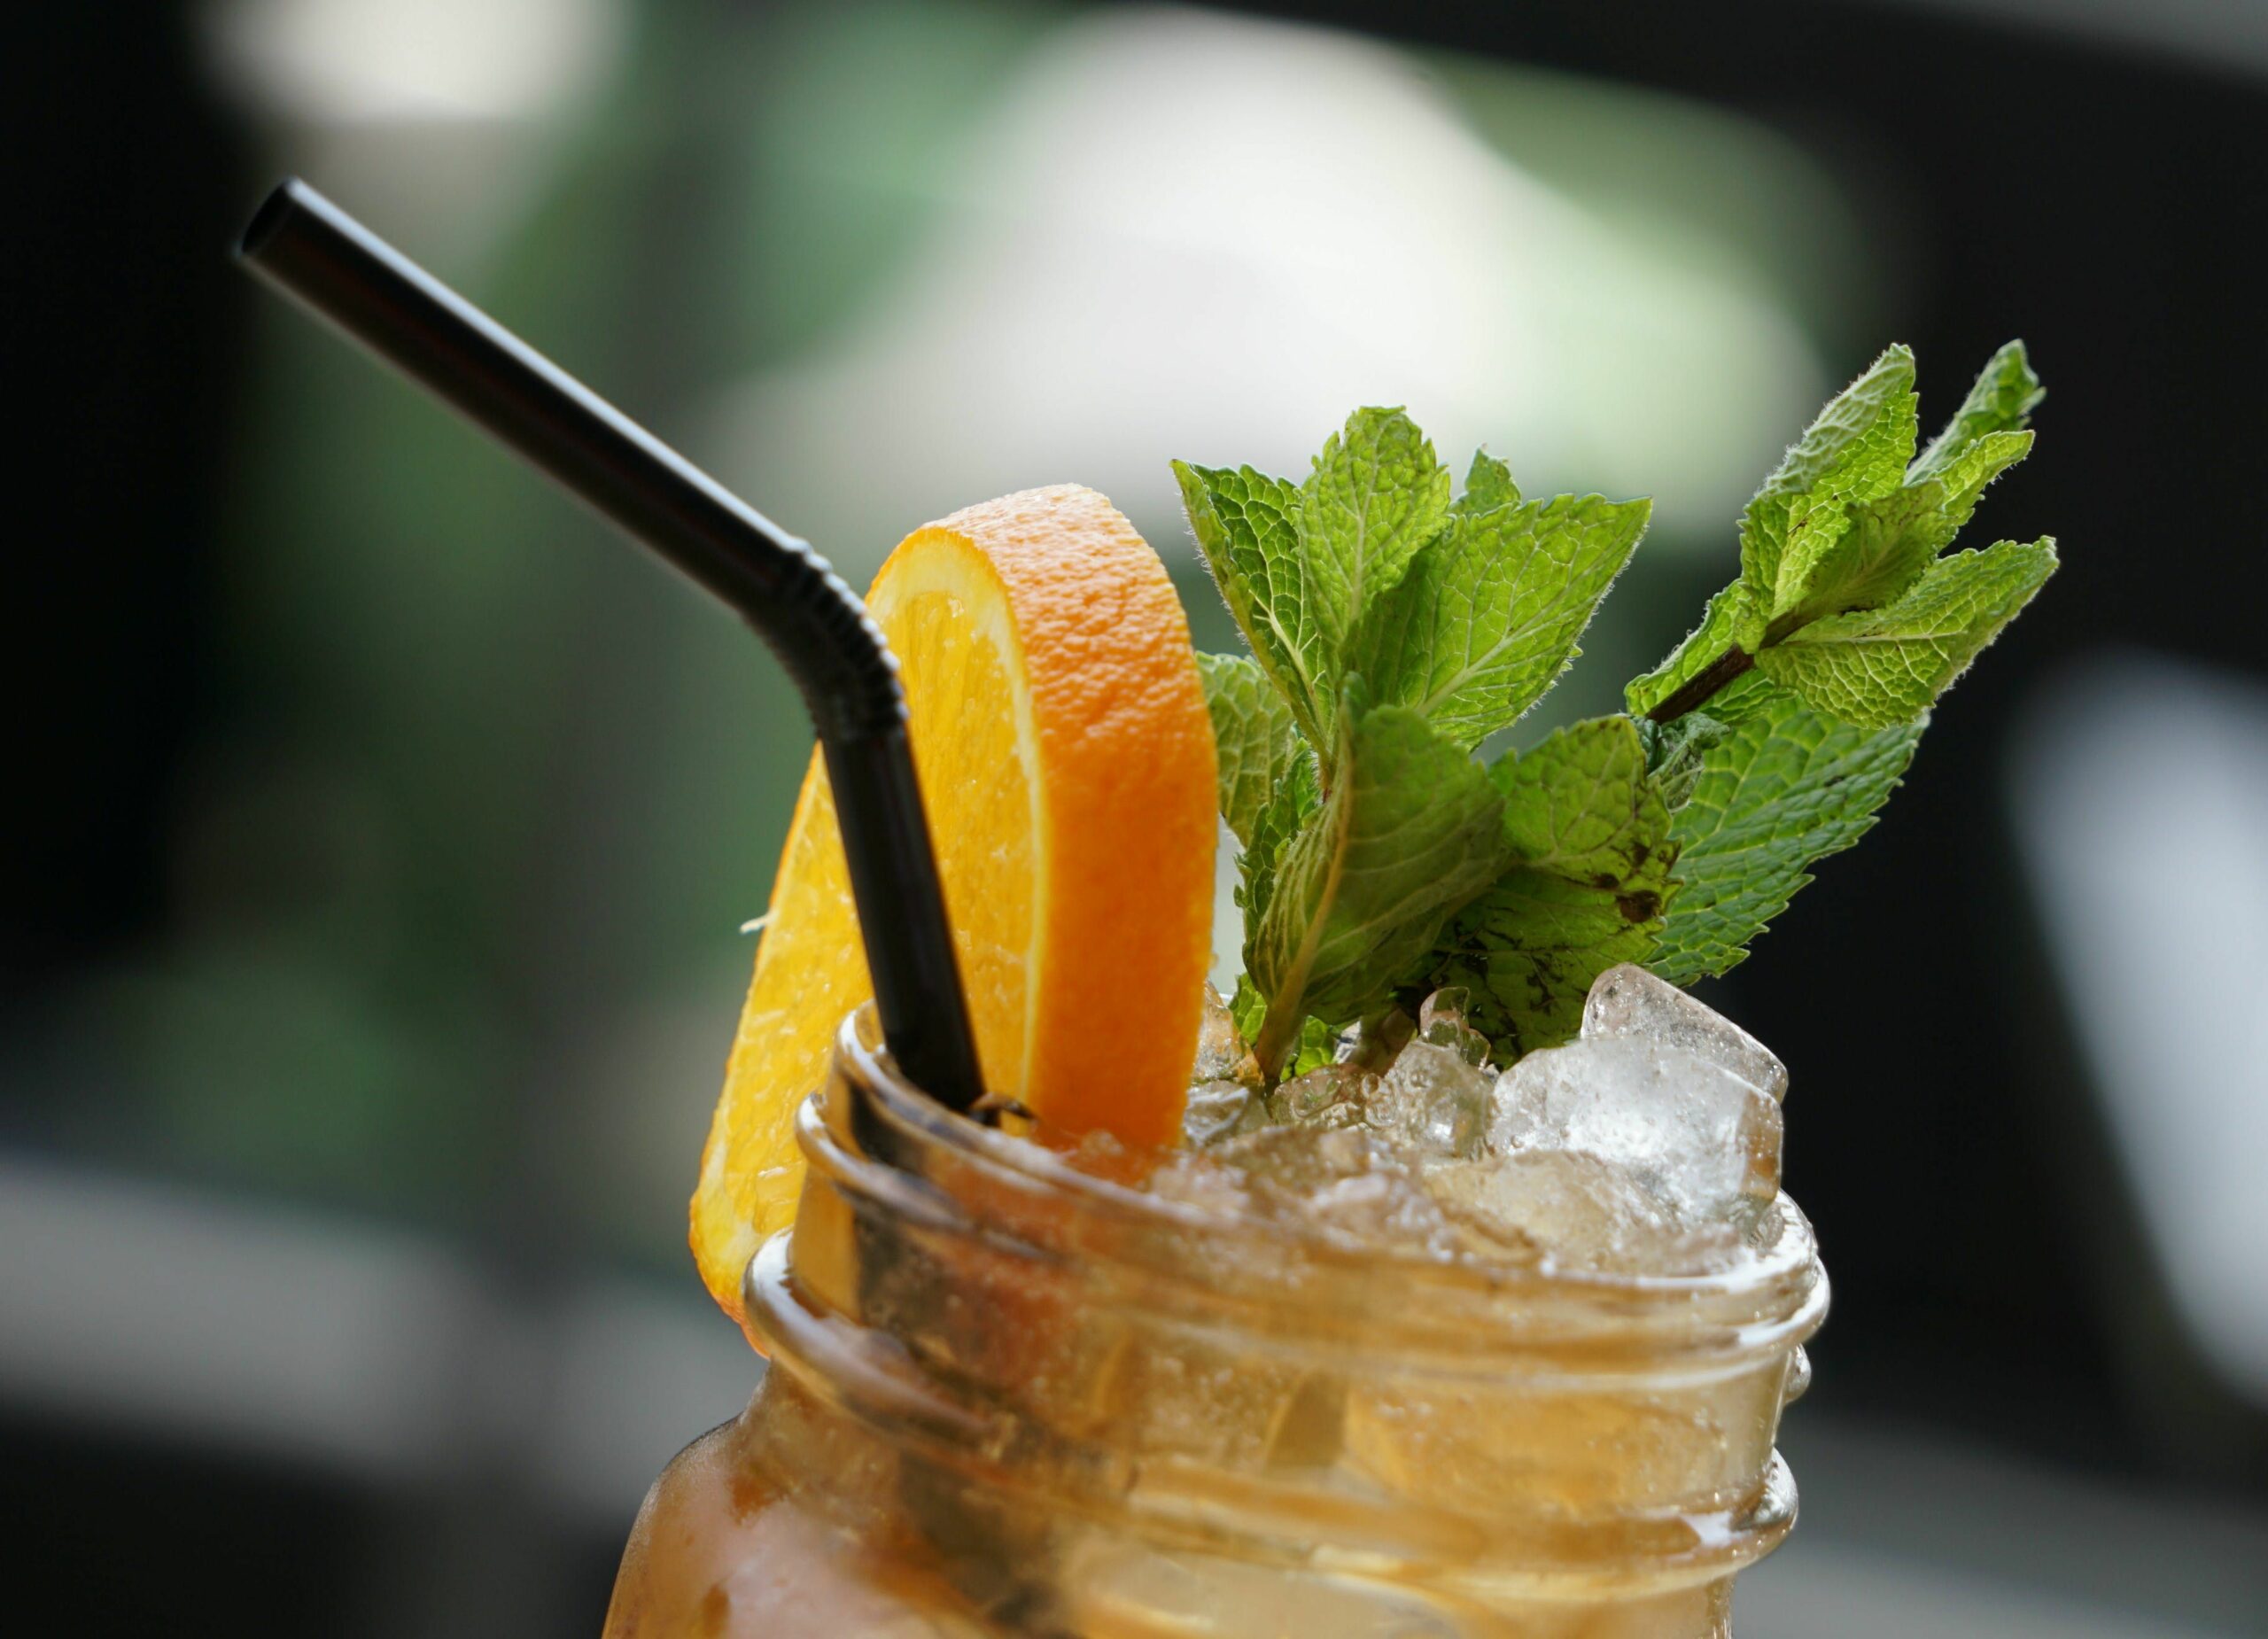 4_iced_tea_and_cannabis_pairings_to_savor_summer_weather_f4d7cdde4d